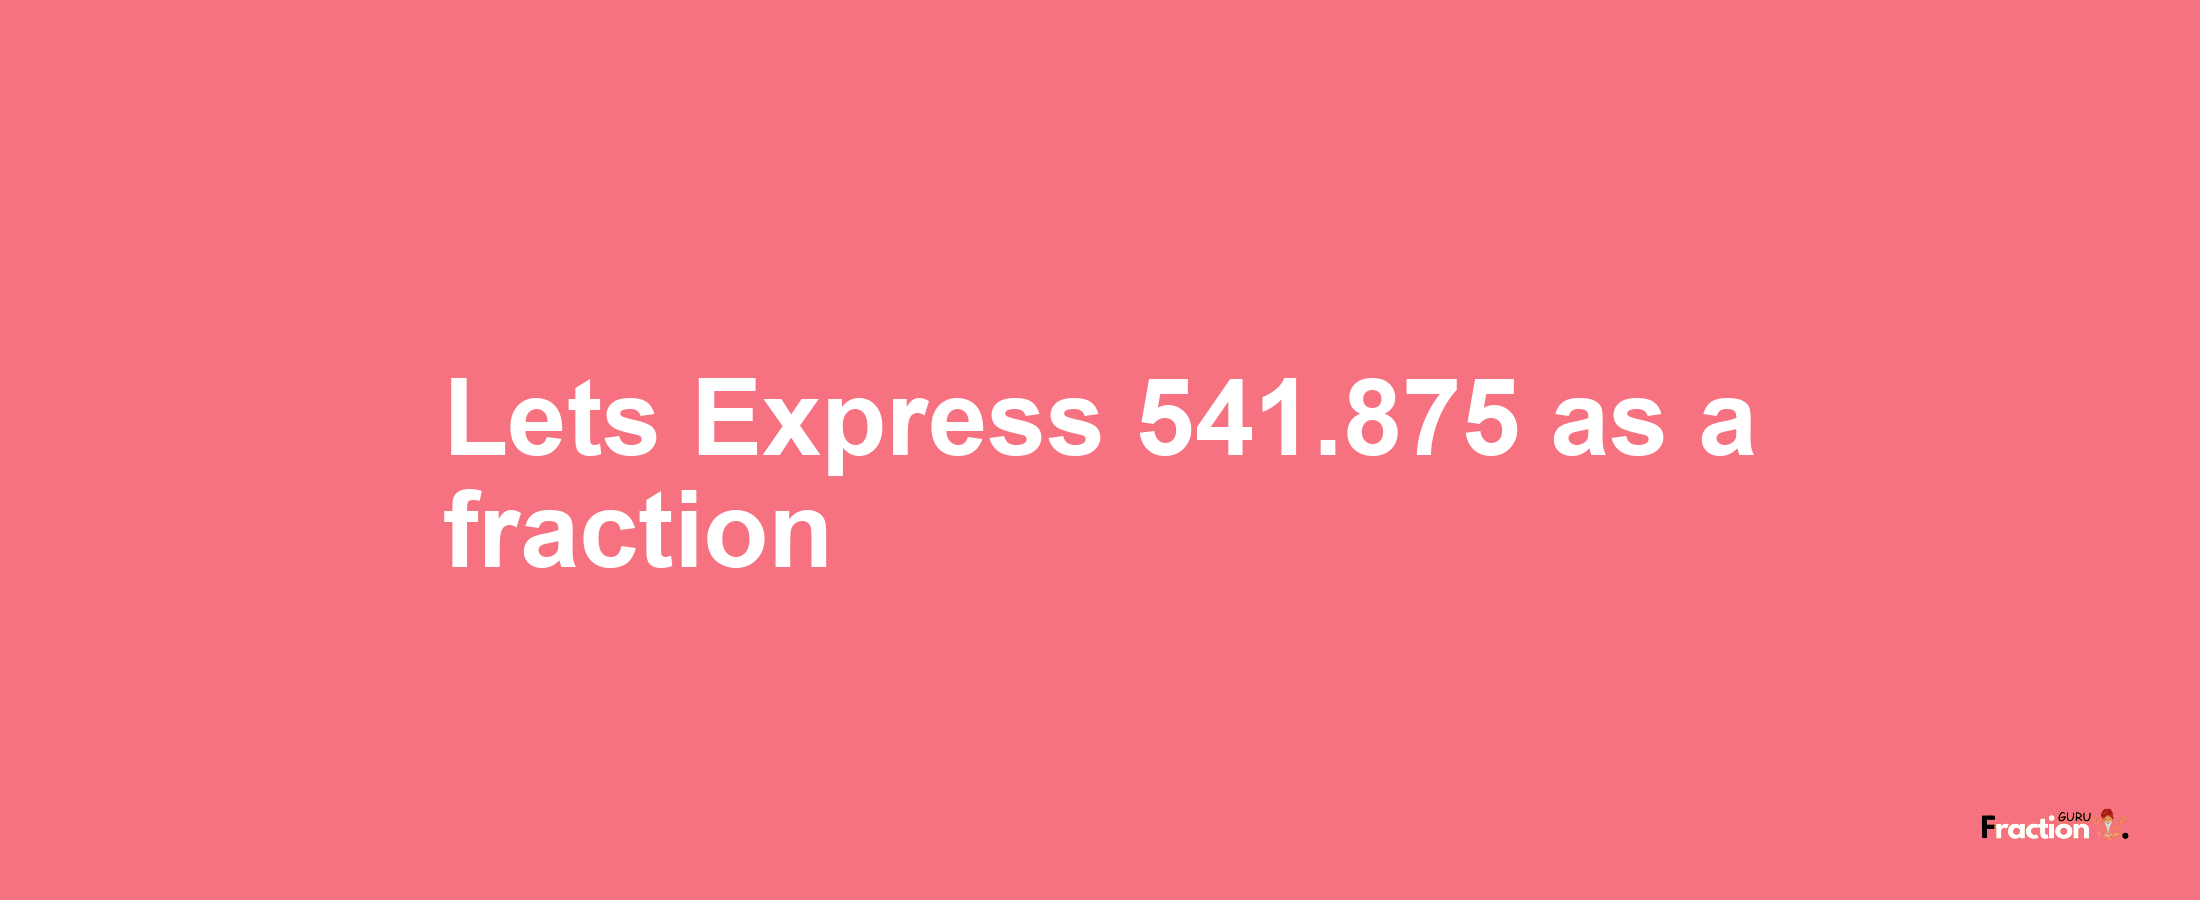 Lets Express 541.875 as afraction